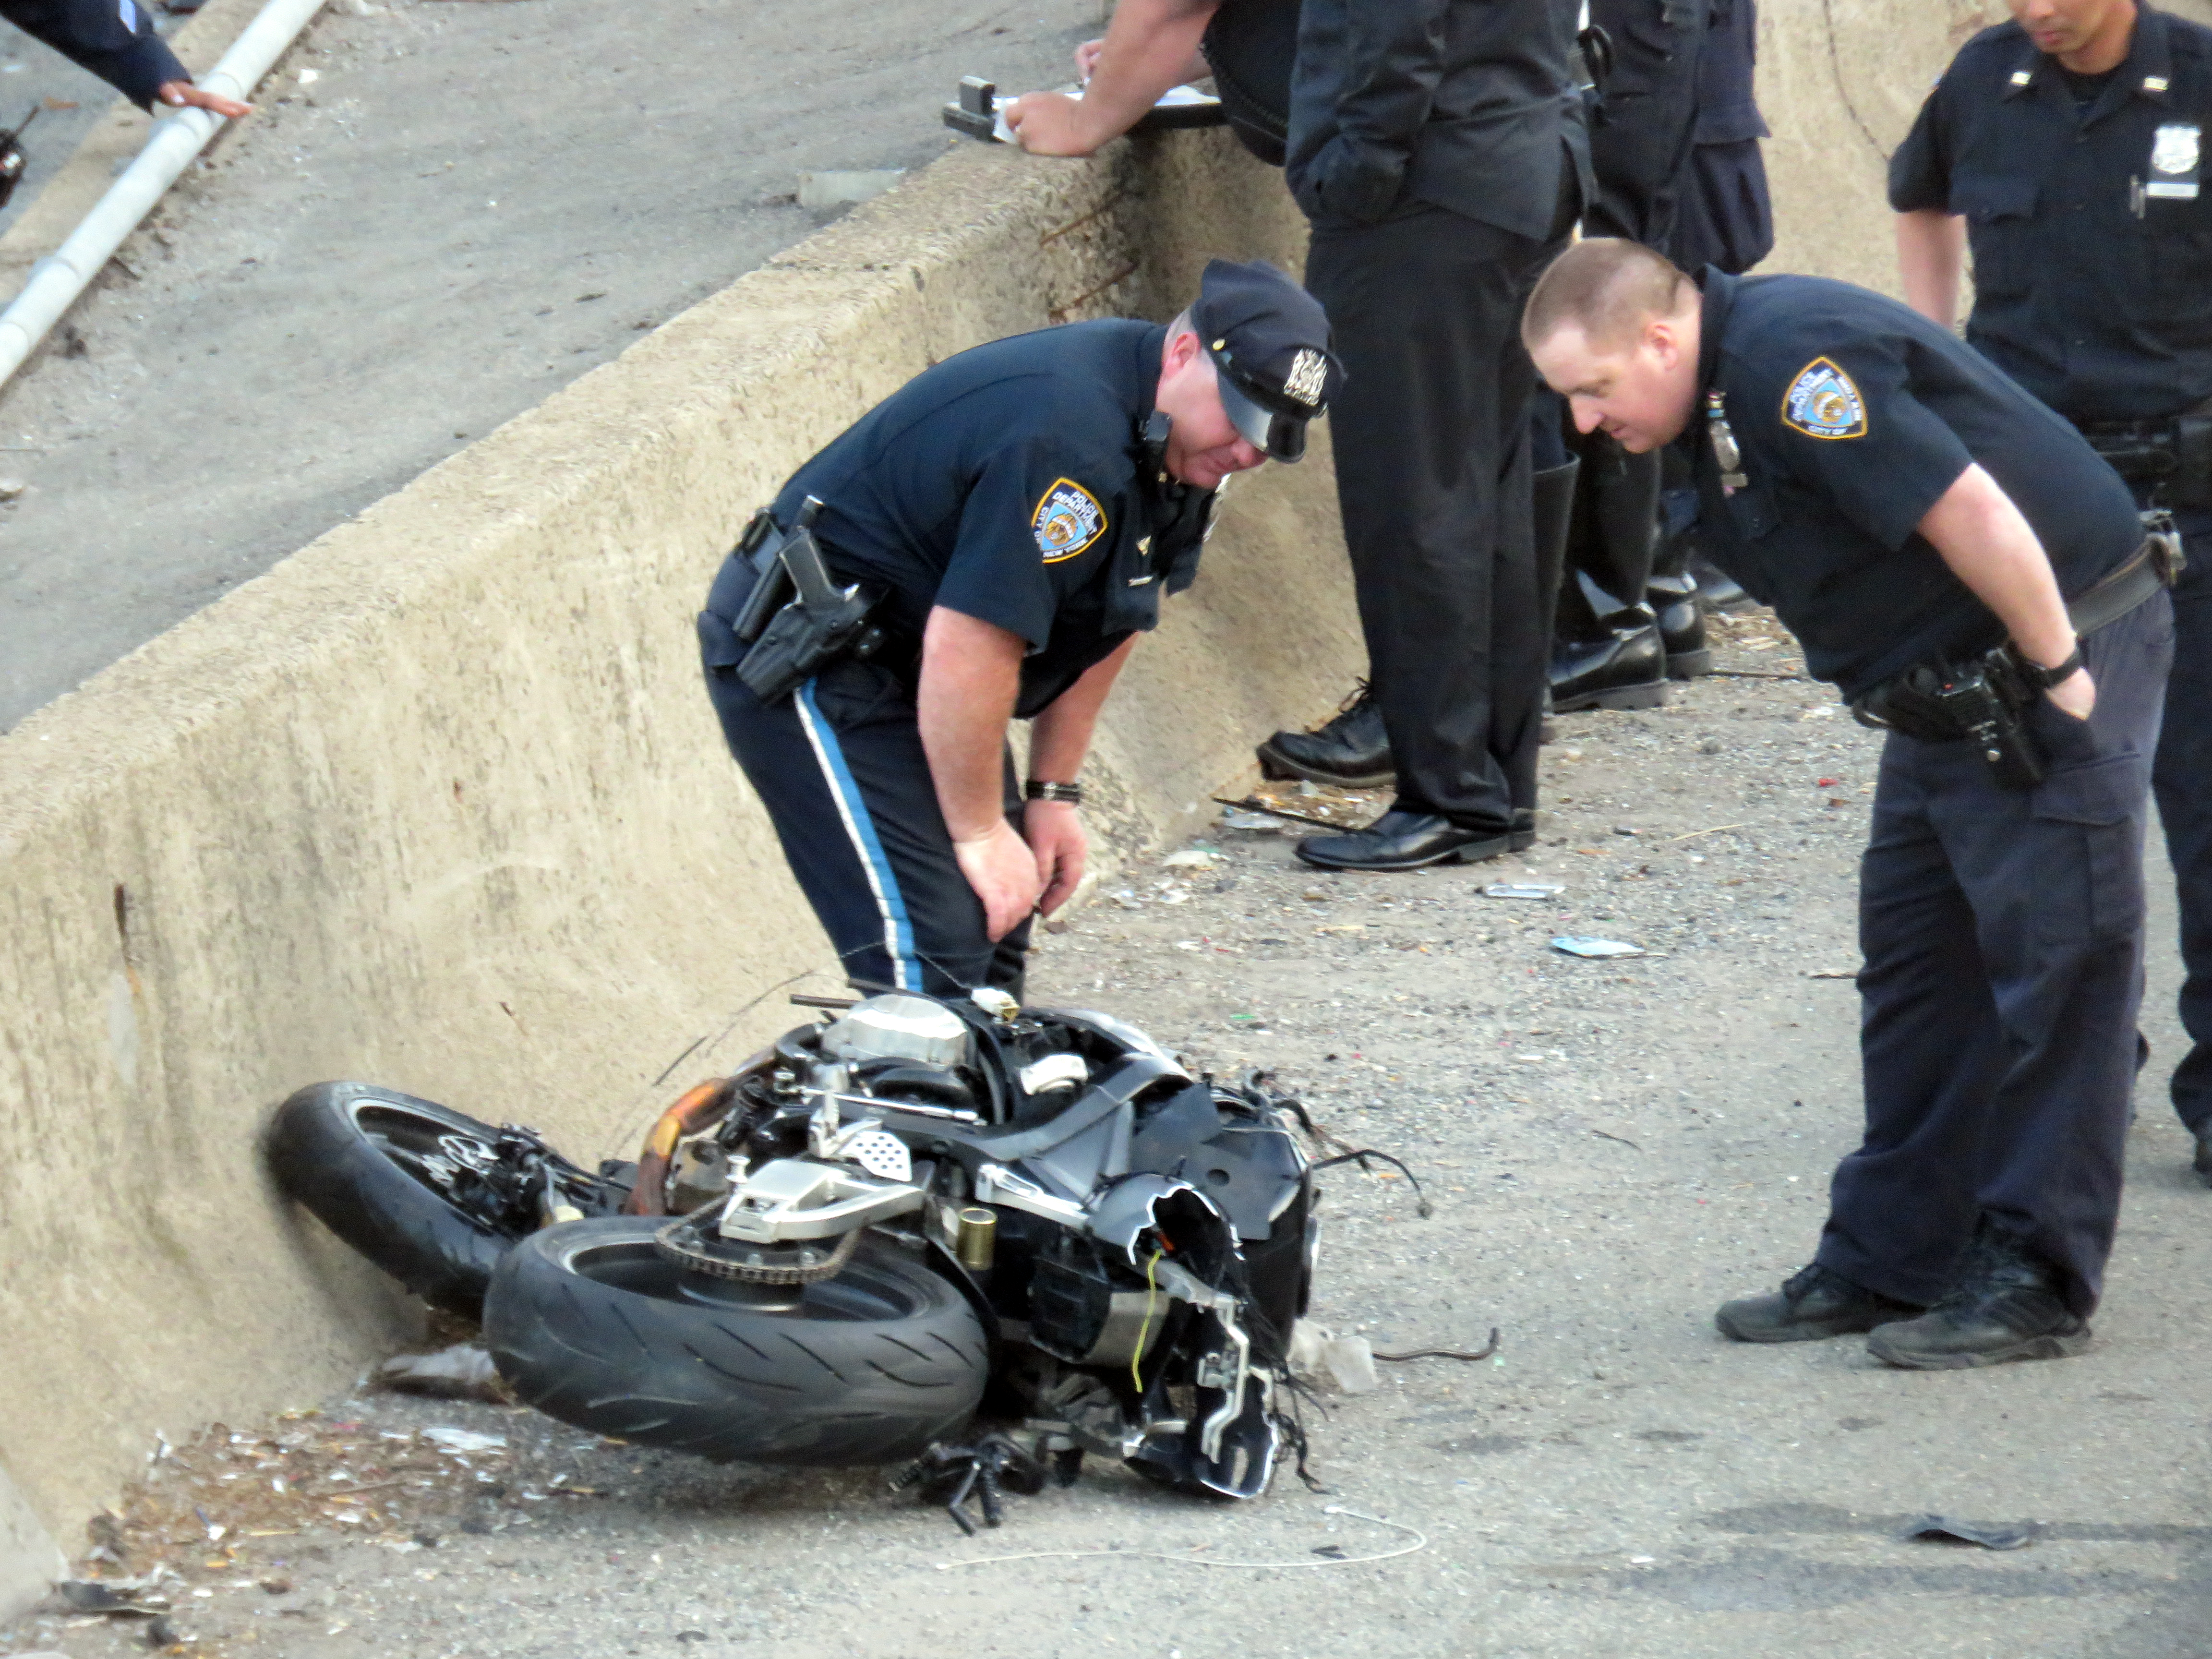 Cops inspect a motorcycle following a deadly crash on the Van Wyck Expressway on May 21.